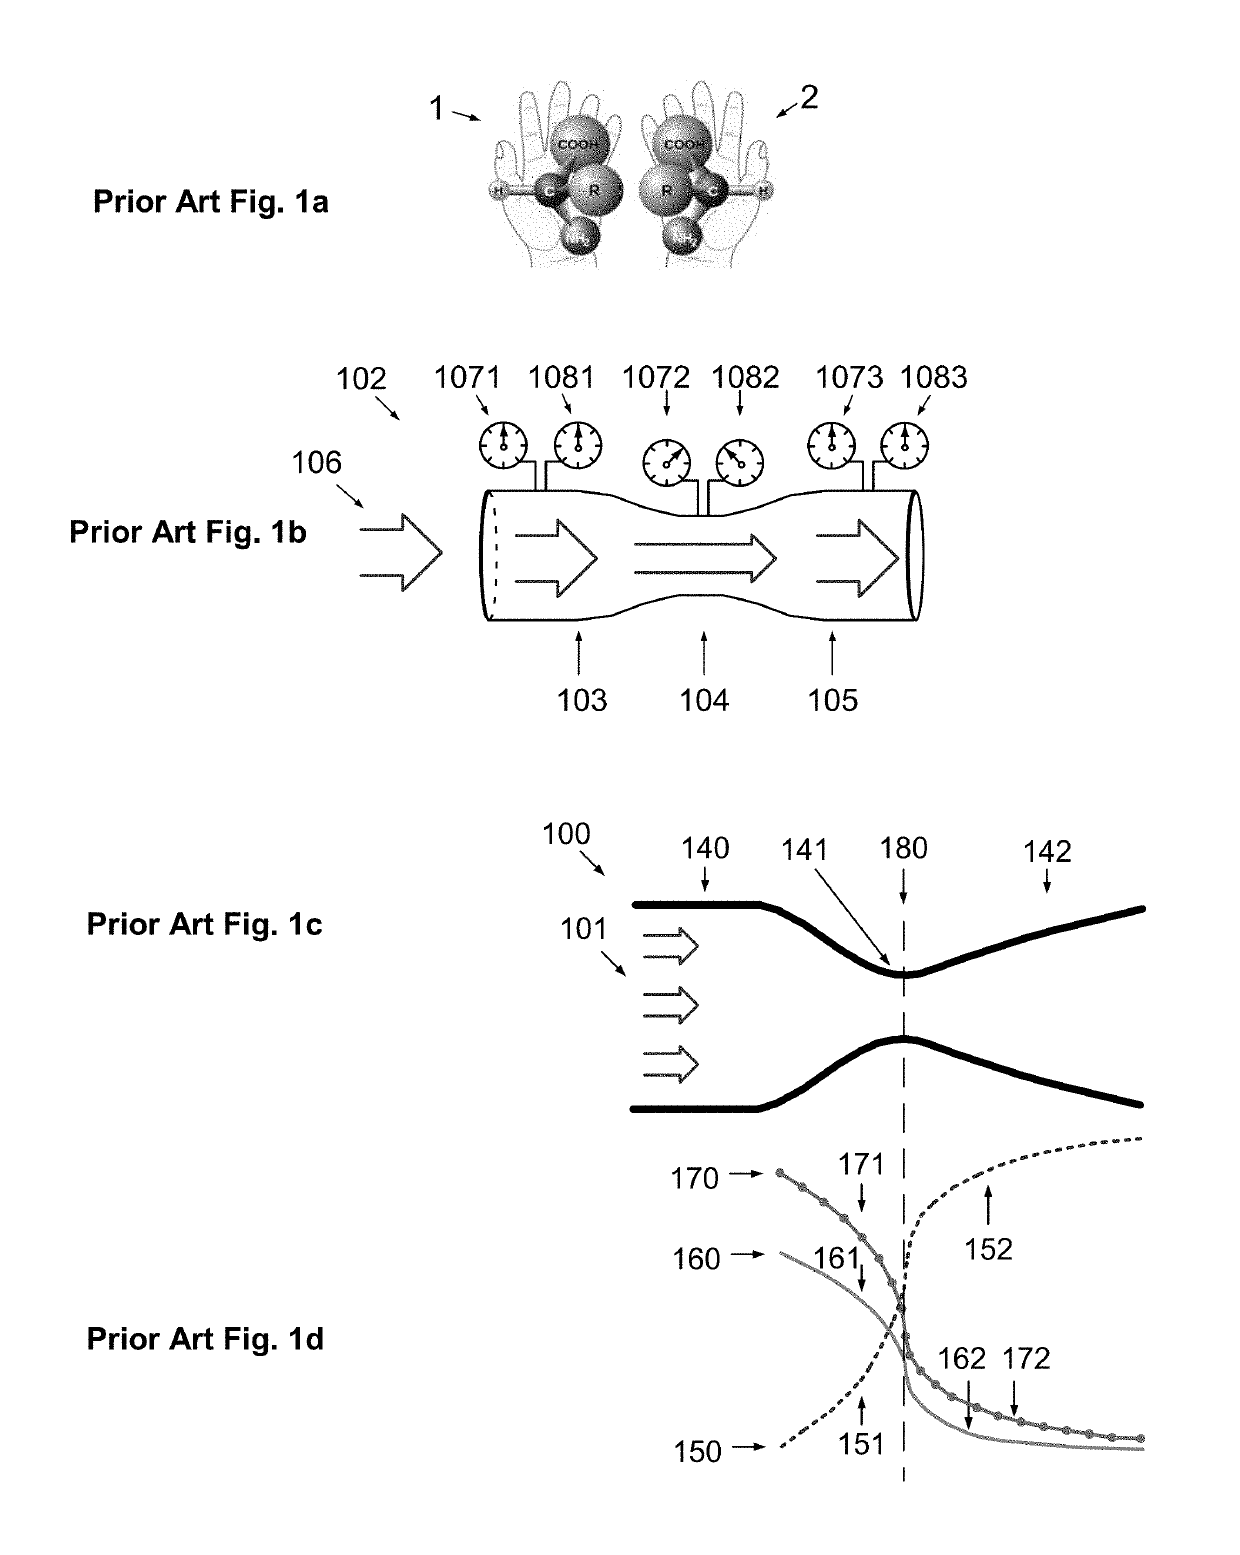 Generalized Jet-Effect and Enhanced Devices